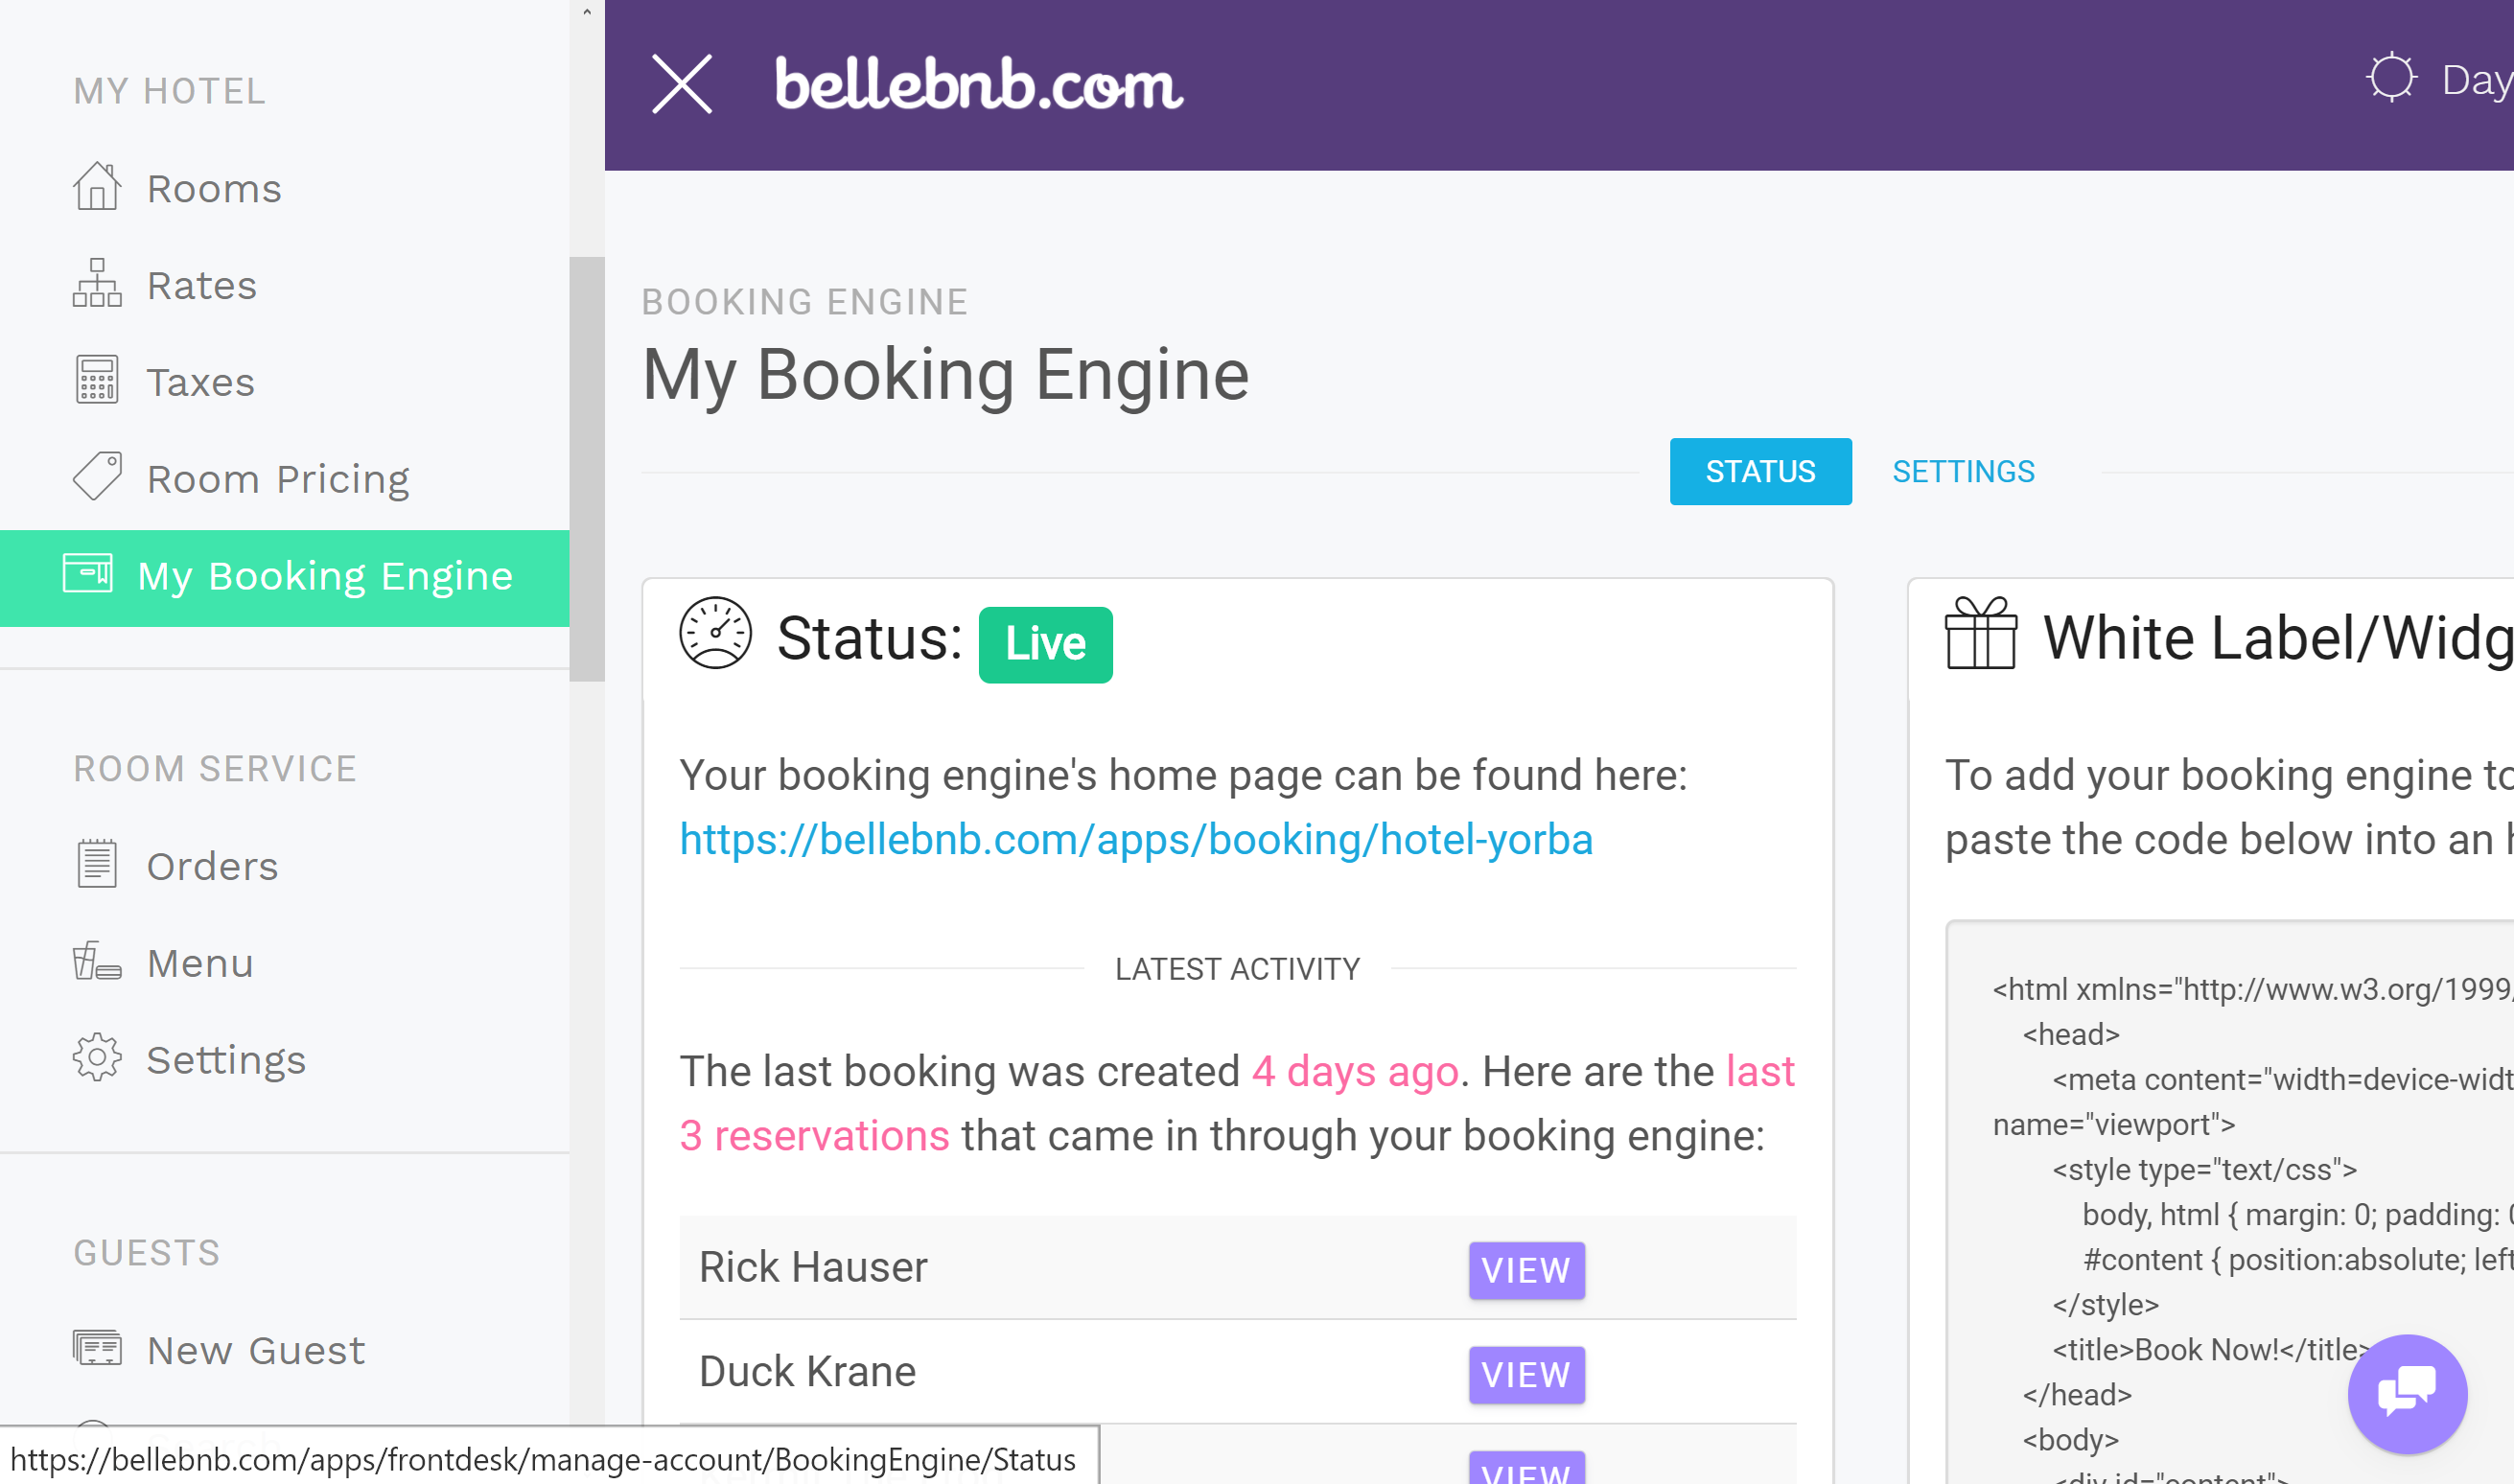 Hotel White Label Booking Engine 
            You can now use your booking engine from your own website! With our new embedding widget, you can take reservations directly from any website. Your reservations are easy, secure, and commission-free.